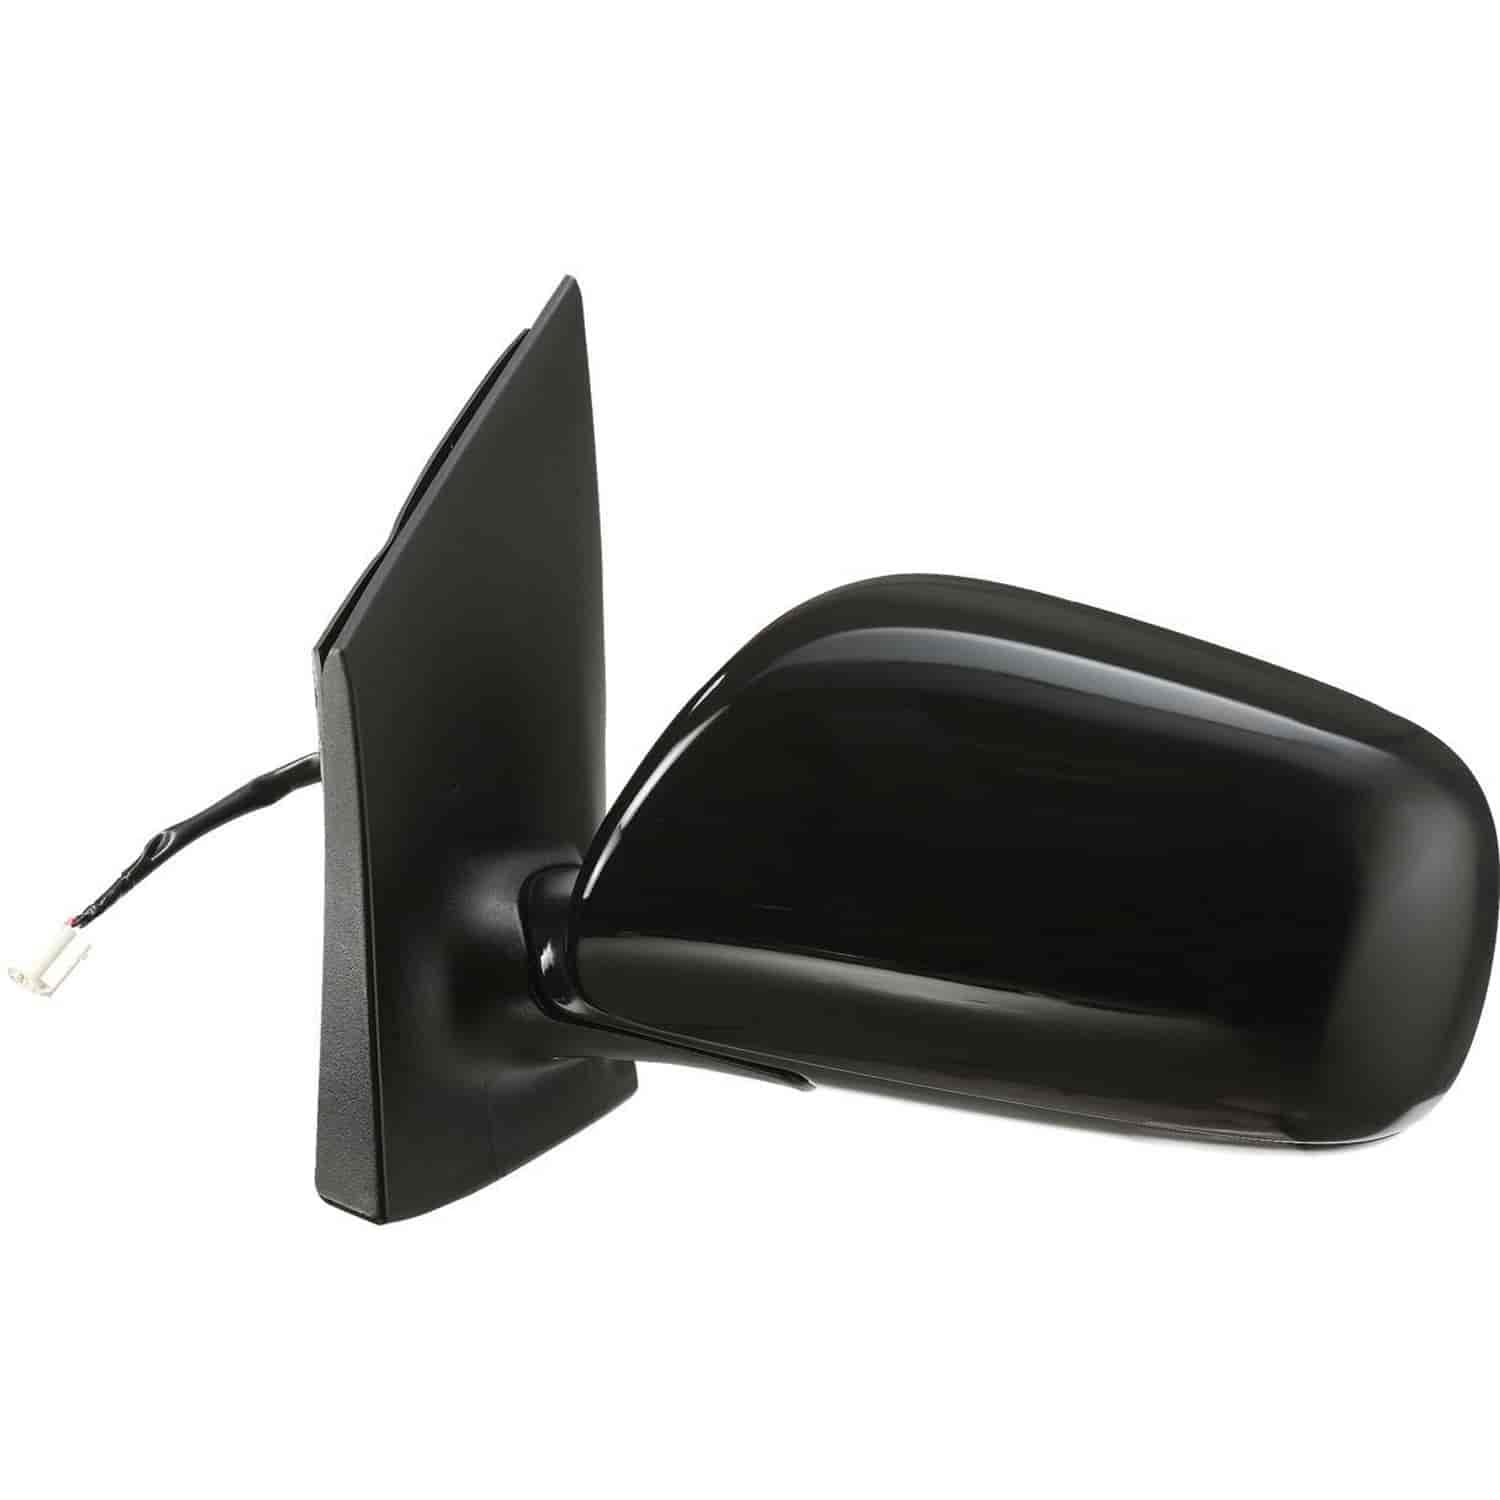 OEM Style Replacement mirror for 07-11 Toyota Yaris Sedan driver side mirror tested to fit and funct